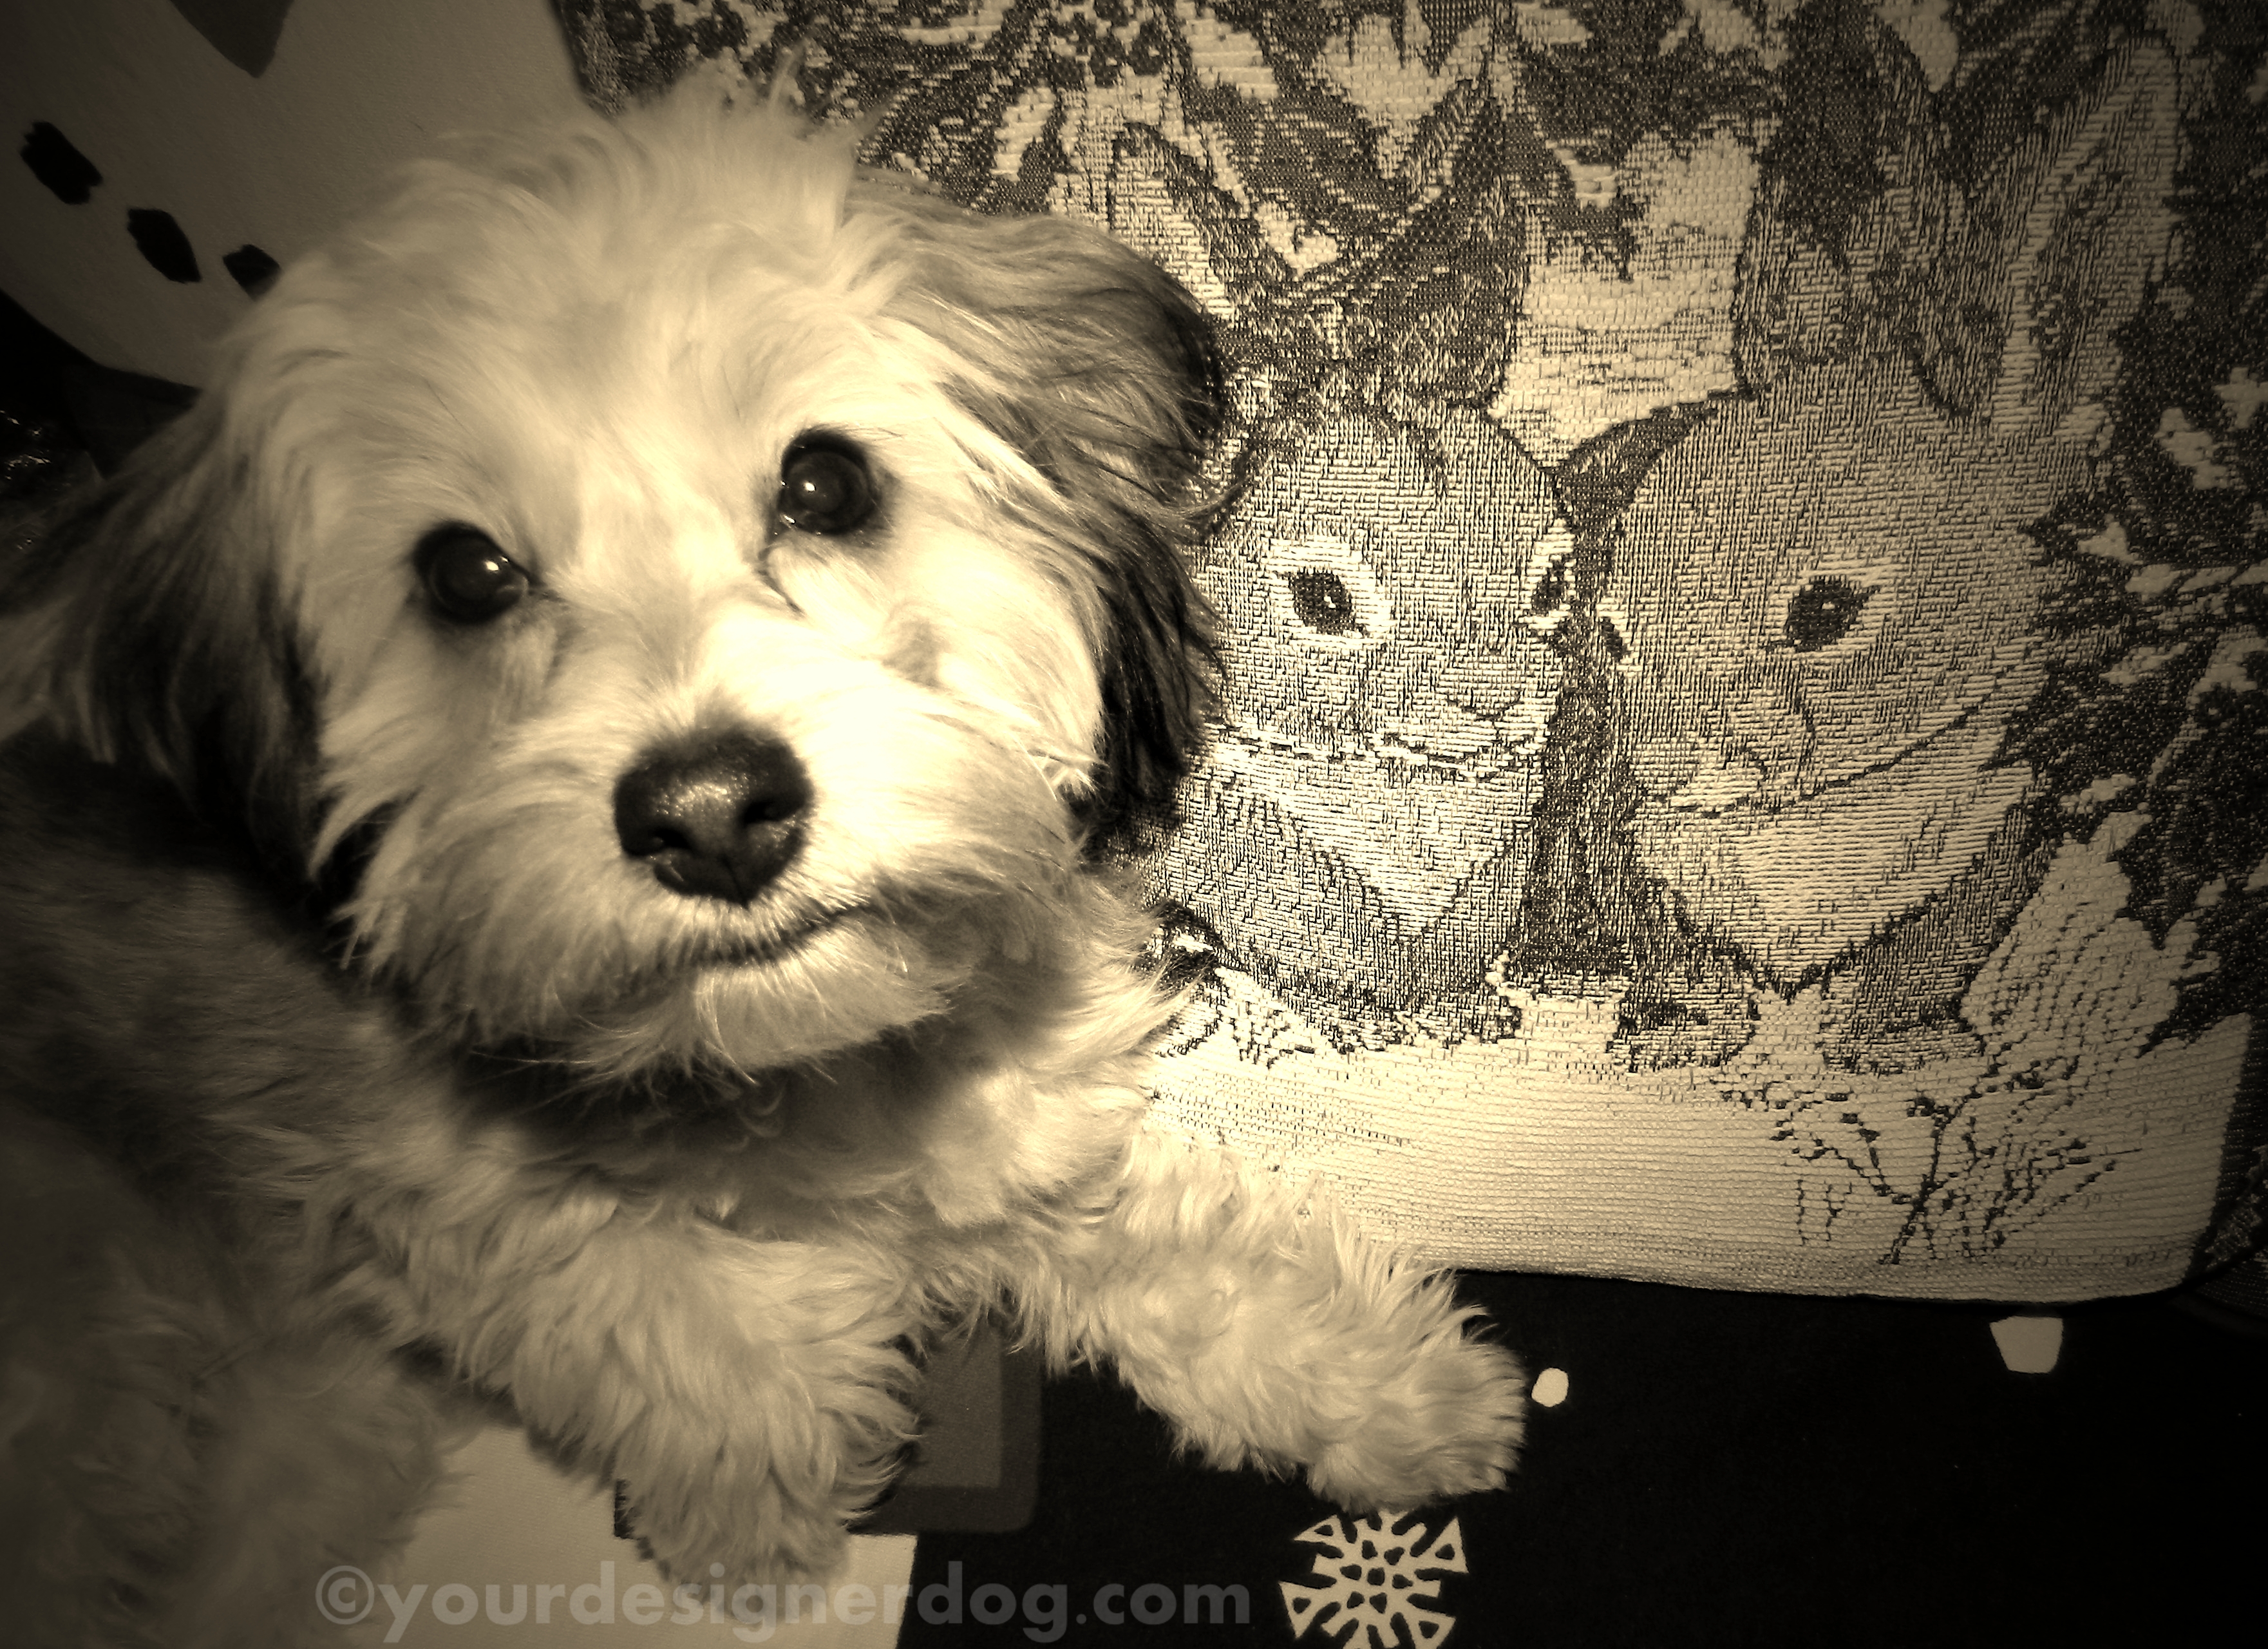 dogs, designer dogs, yorkipoo, yorkie poo, puppy, bunny, winter, sepia photography